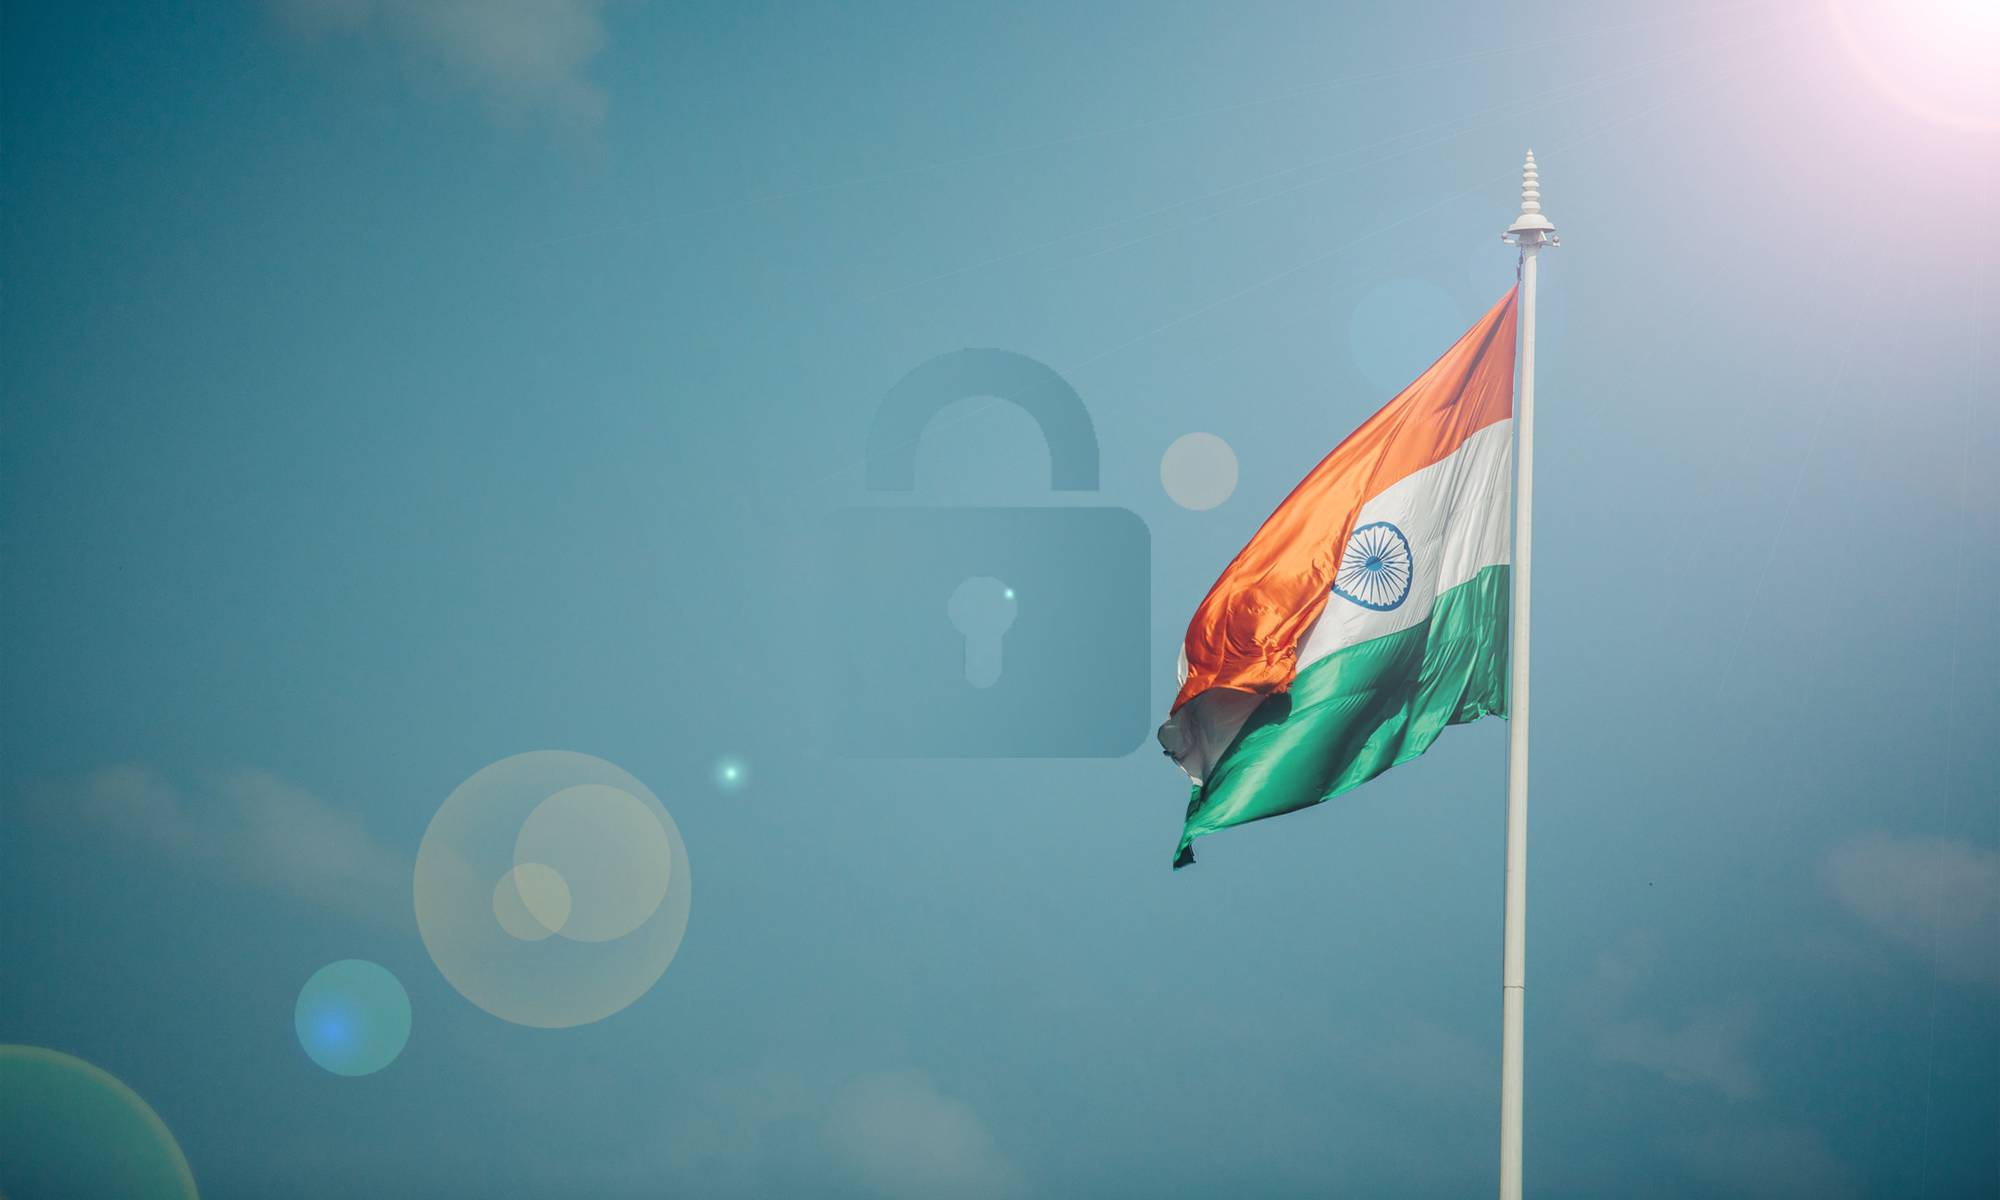 An image of the Indian flag depicting the Indian Data Protection Bill of 2019